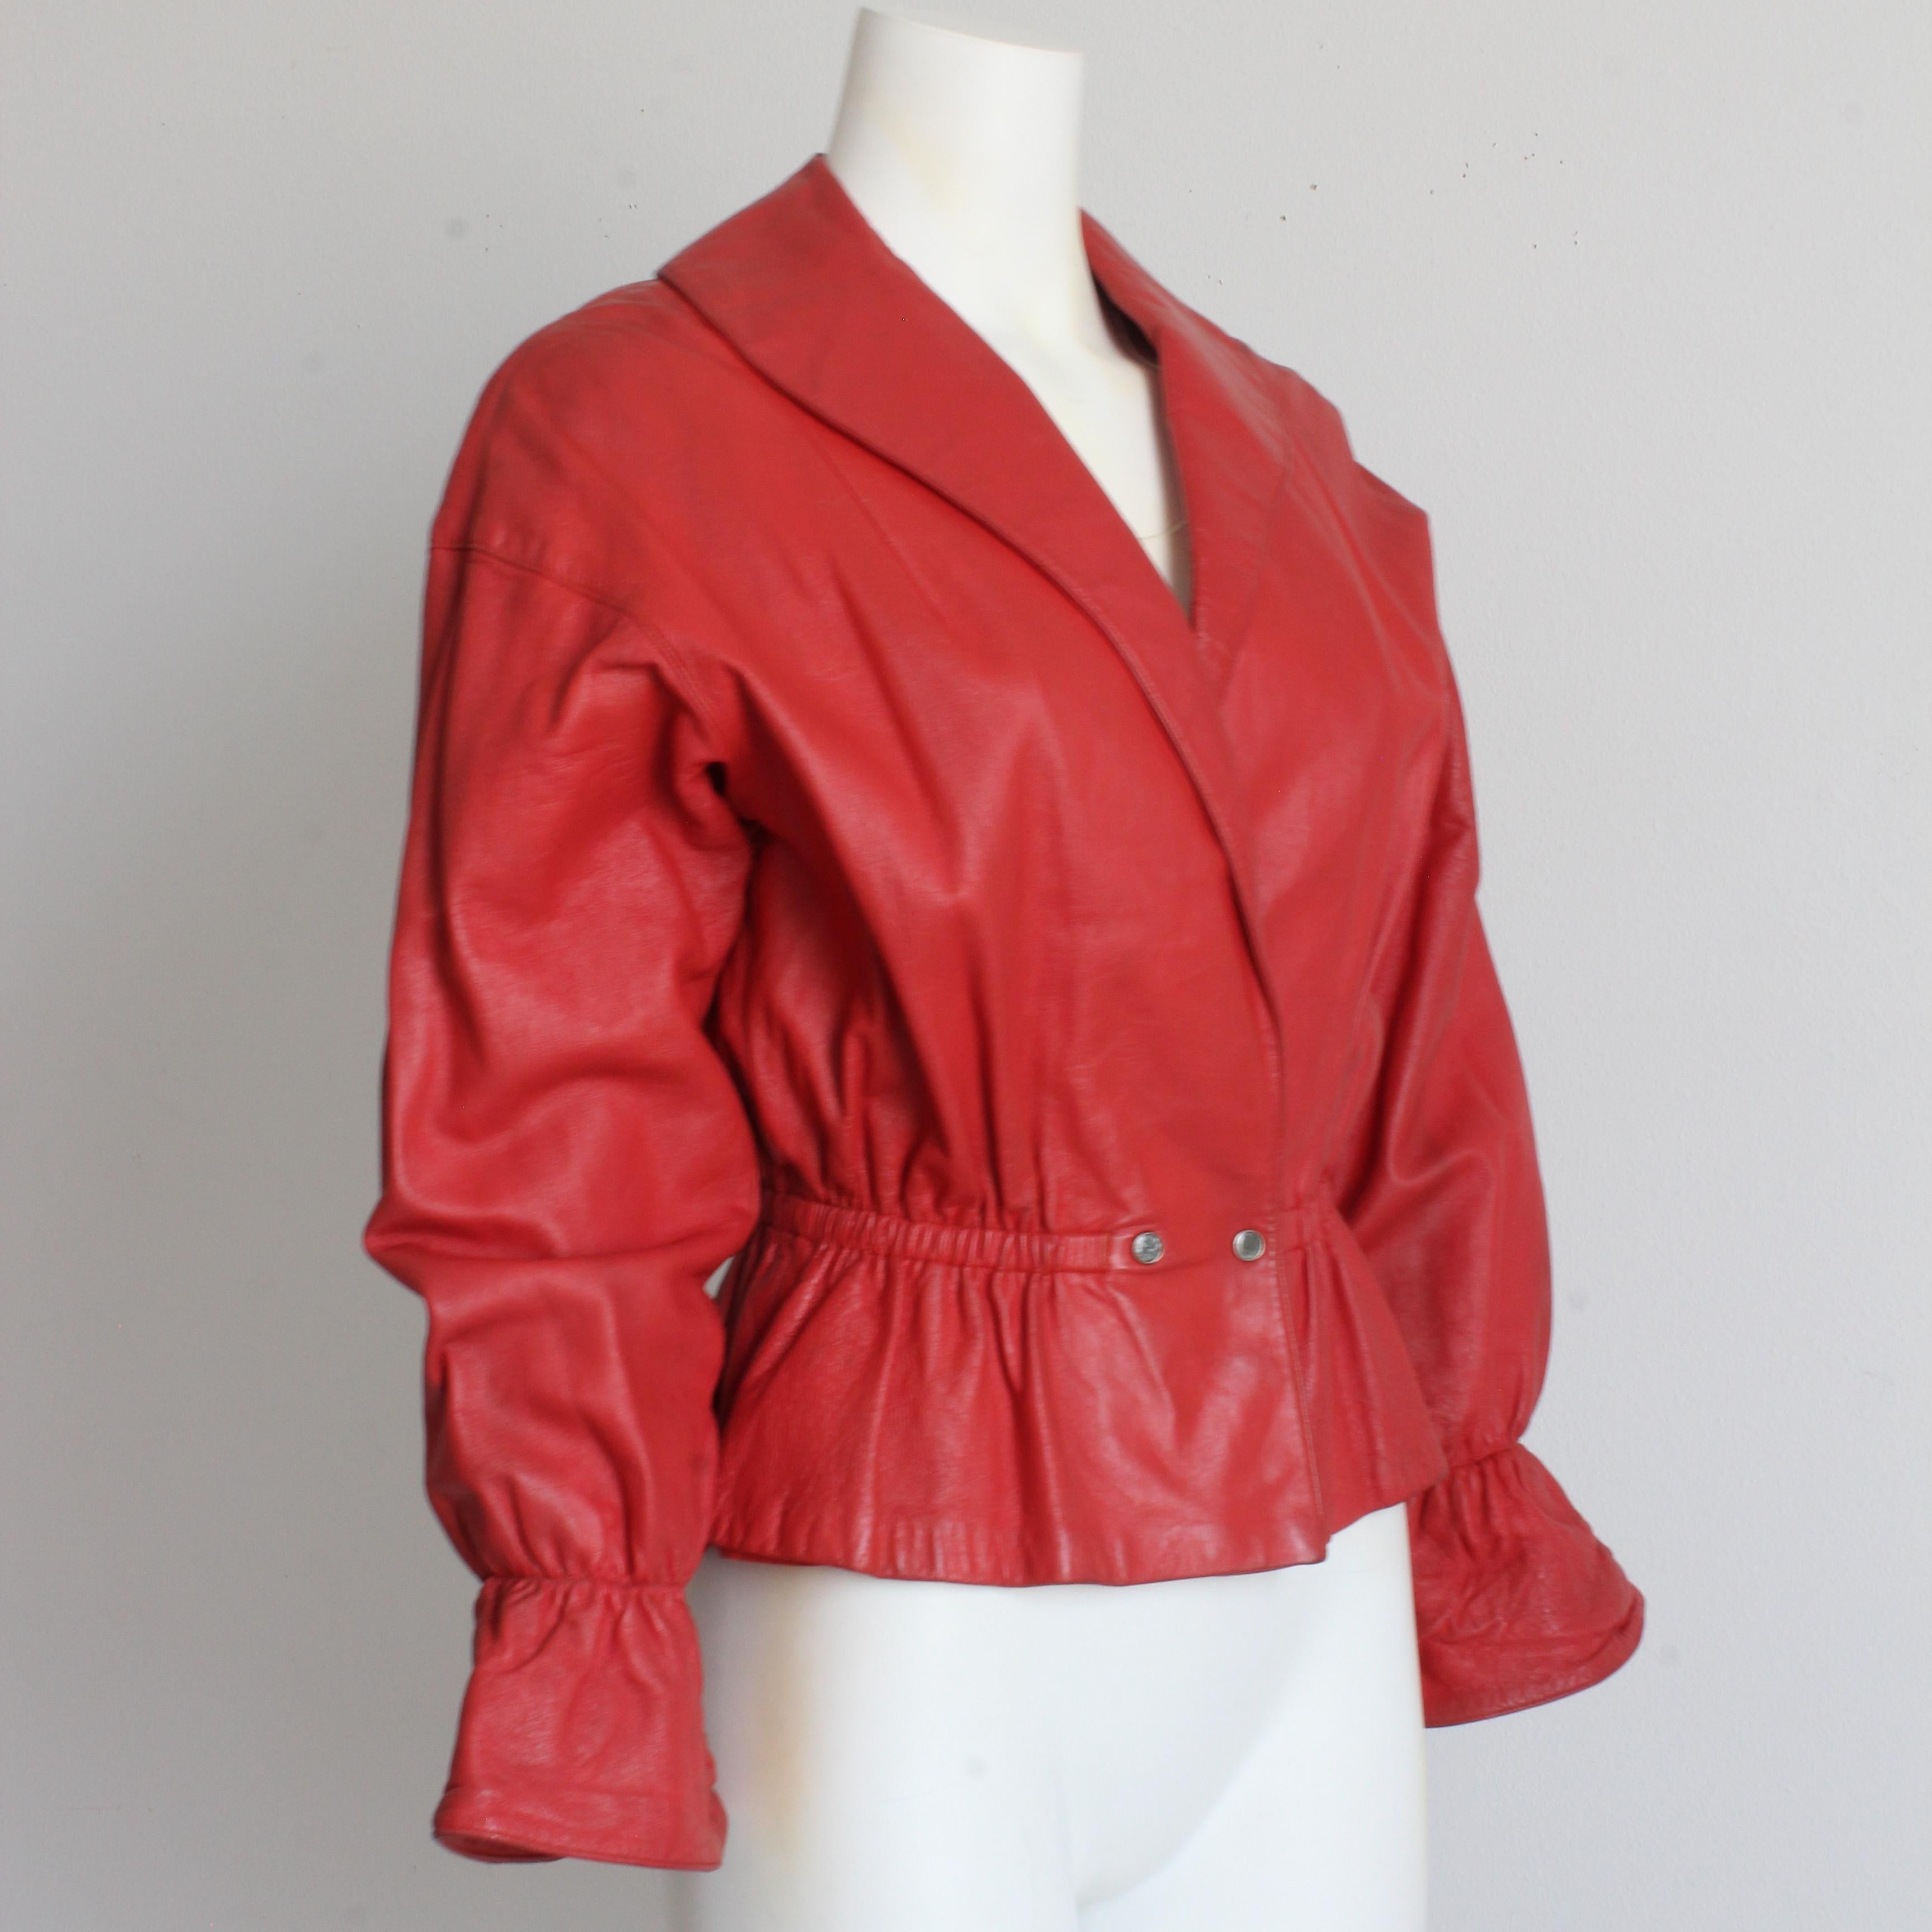 Bonnie Cashin for Sills Red Leather Jacket with Peplum Waist Rare Vintage 1960s  In Good Condition For Sale In Port Saint Lucie, FL